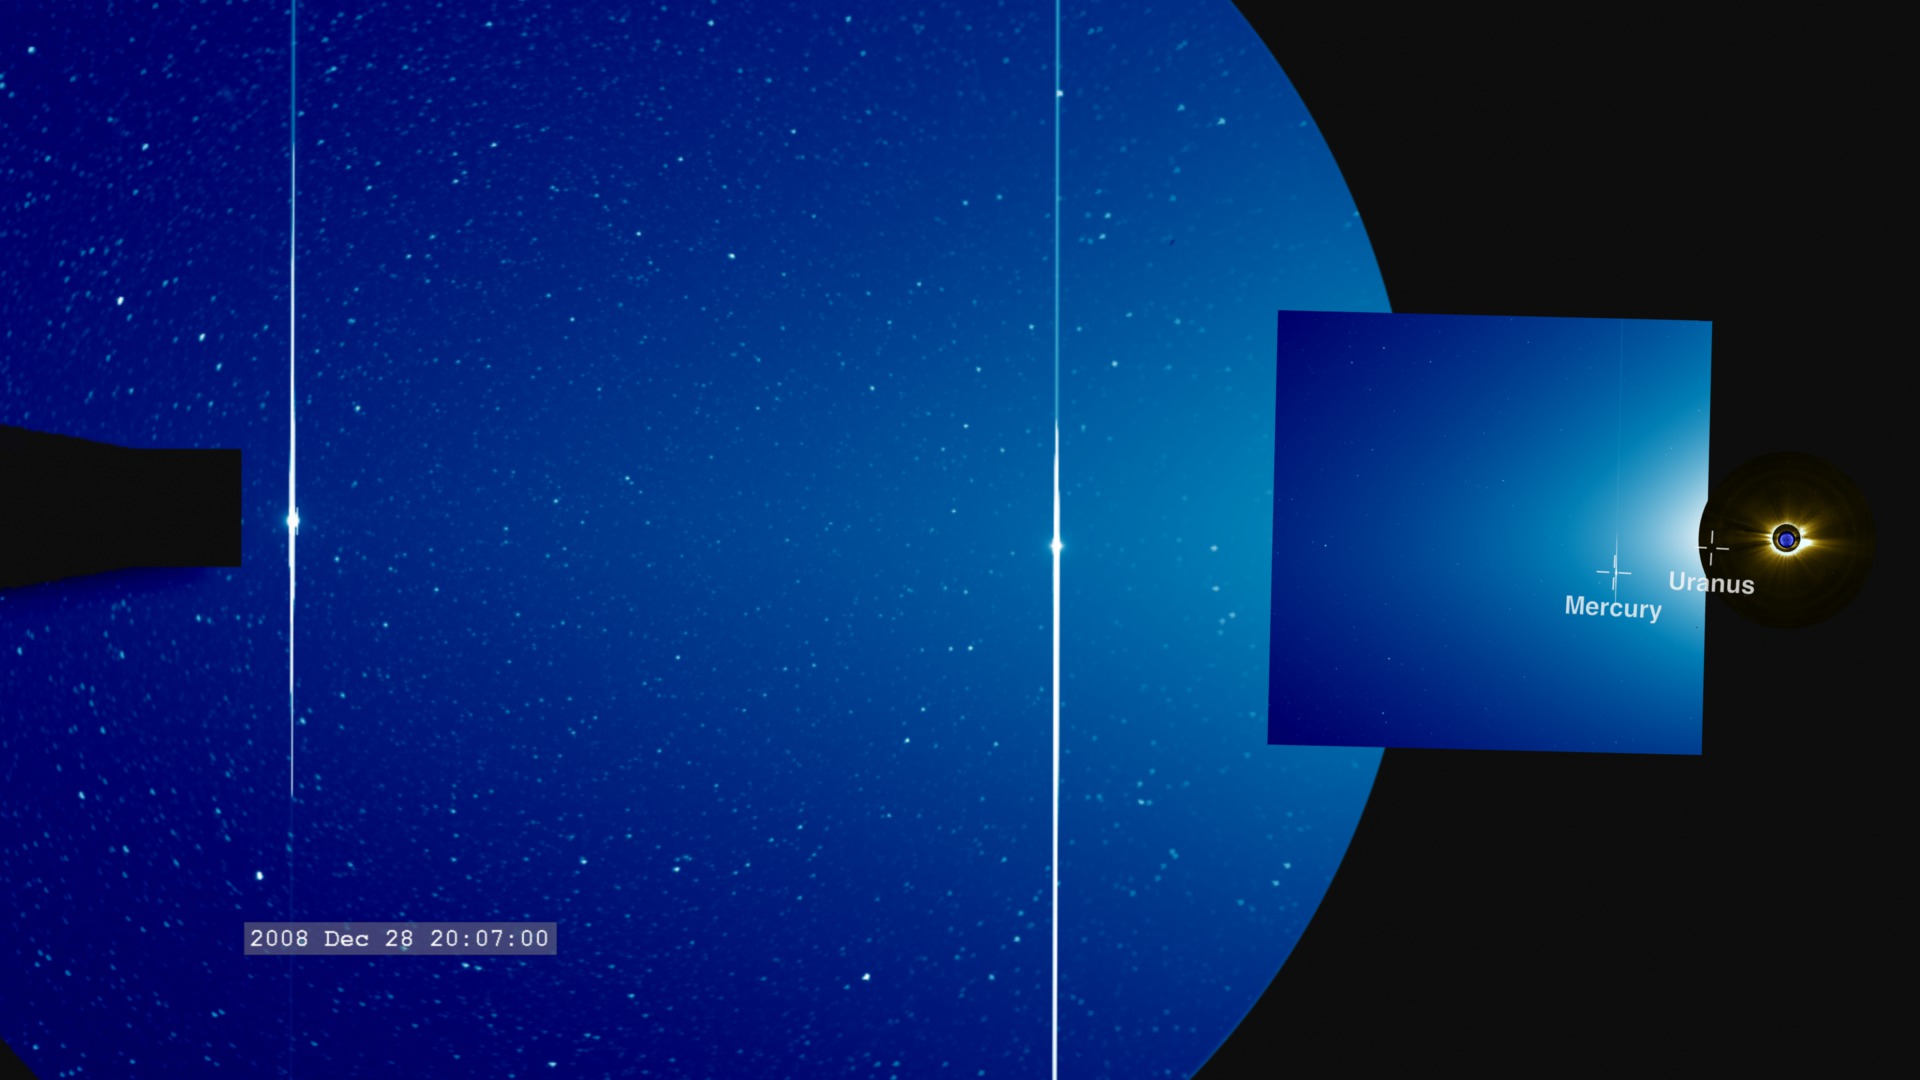 A movie of the heliospheric region viewed from STEREO-A.  If you watch the bright 'bloom' created by the Earth (left side) starting around the December 28, 2008 time marker, you will see a much smaller, fainter 'bloom' appear between the Earth and the Sun.  This is the Moon appearing at maximum elongation relative to the STEREO-A spacecraft.